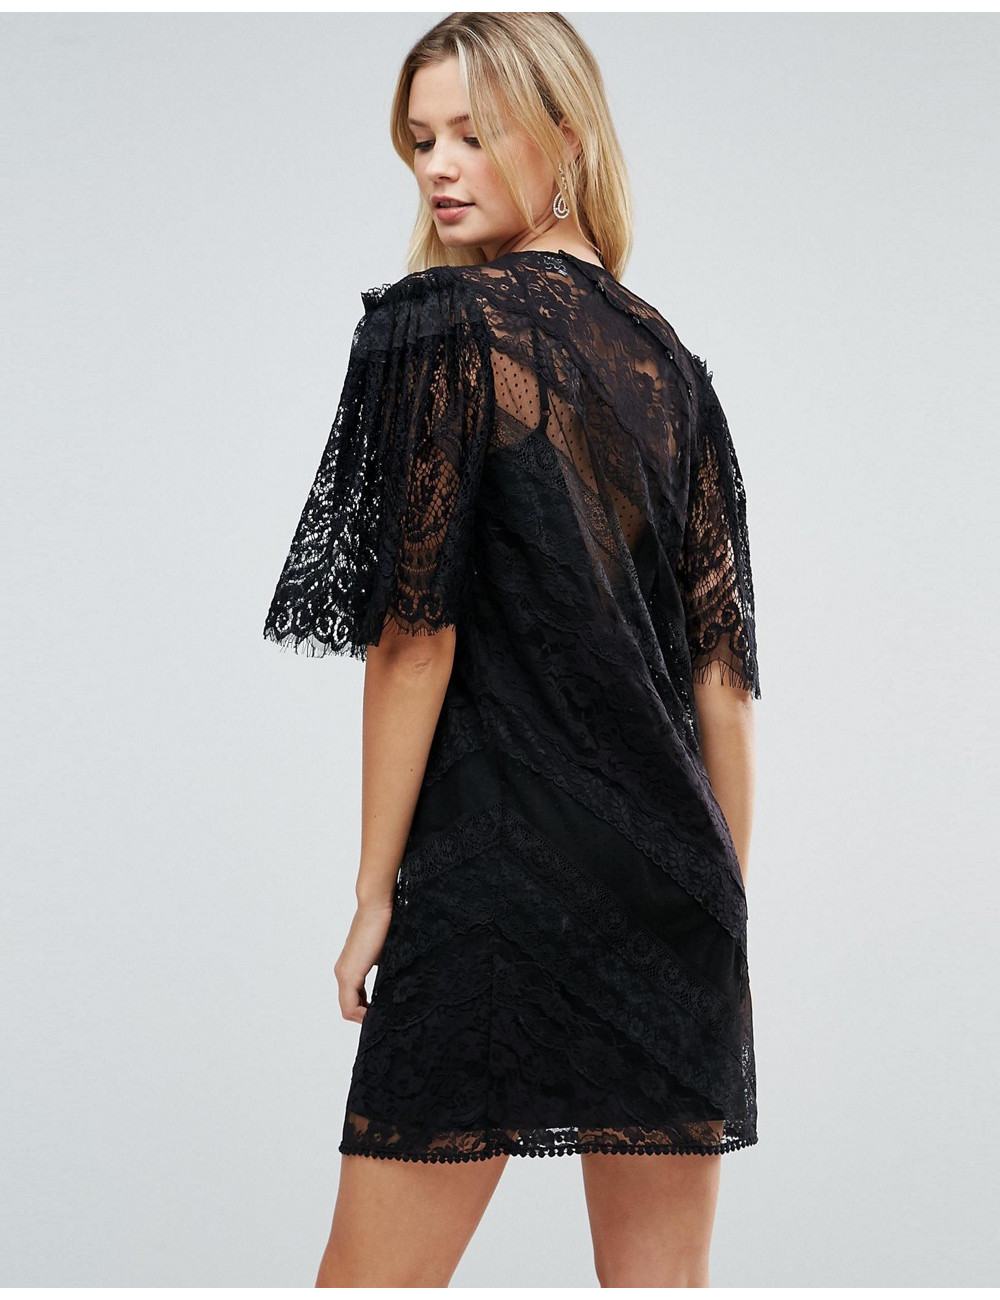 ASOS TALL Delicate Lace...